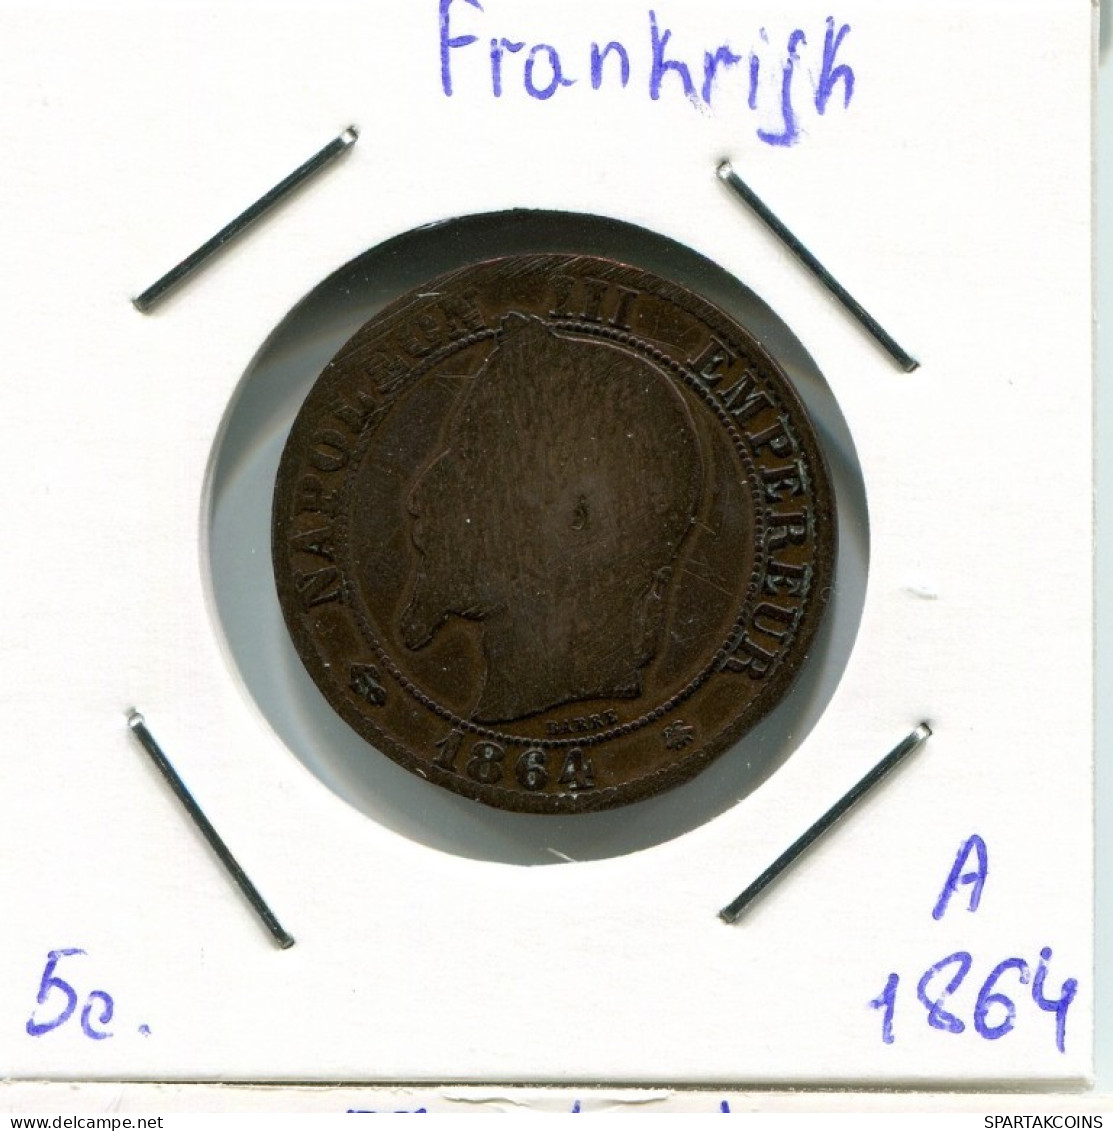 5 CENTIMES 1864 A FRANCE Pièce Napoleon III Imperator #AK997.F.A - 5 Centimes